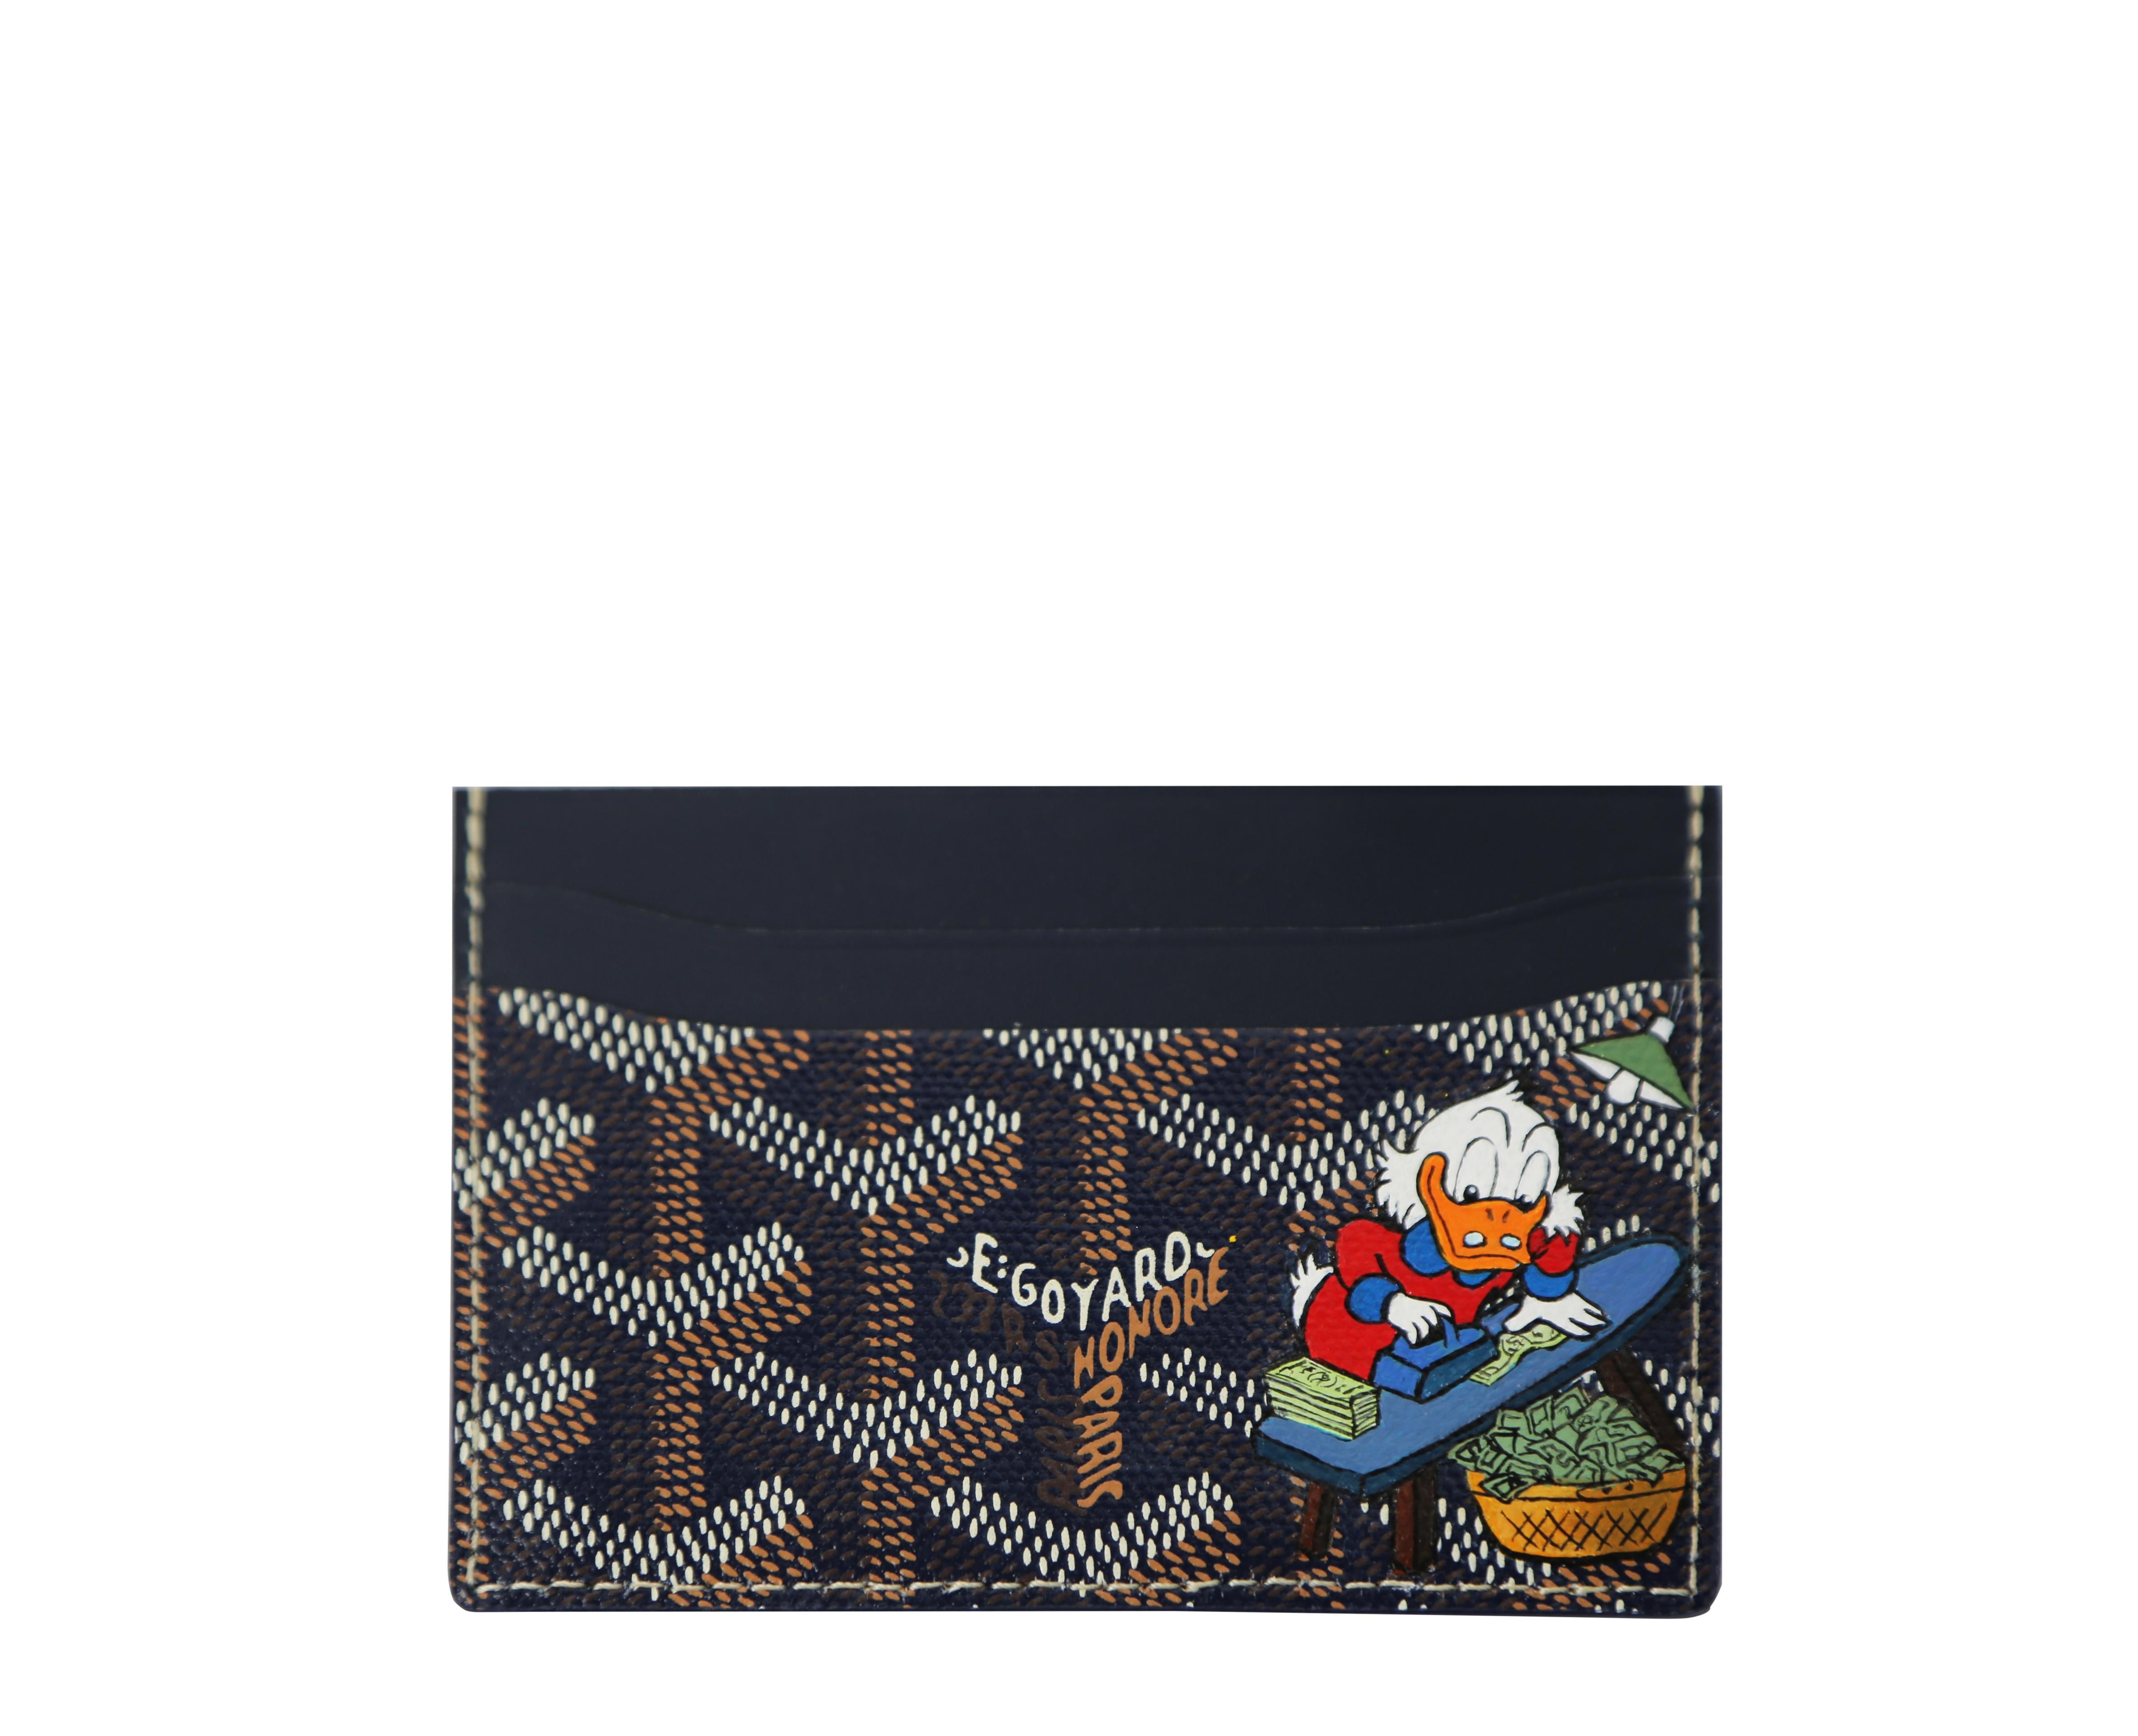 Goyard Customised Saint Sulpice Wallet  In New Condition For Sale In London, GB